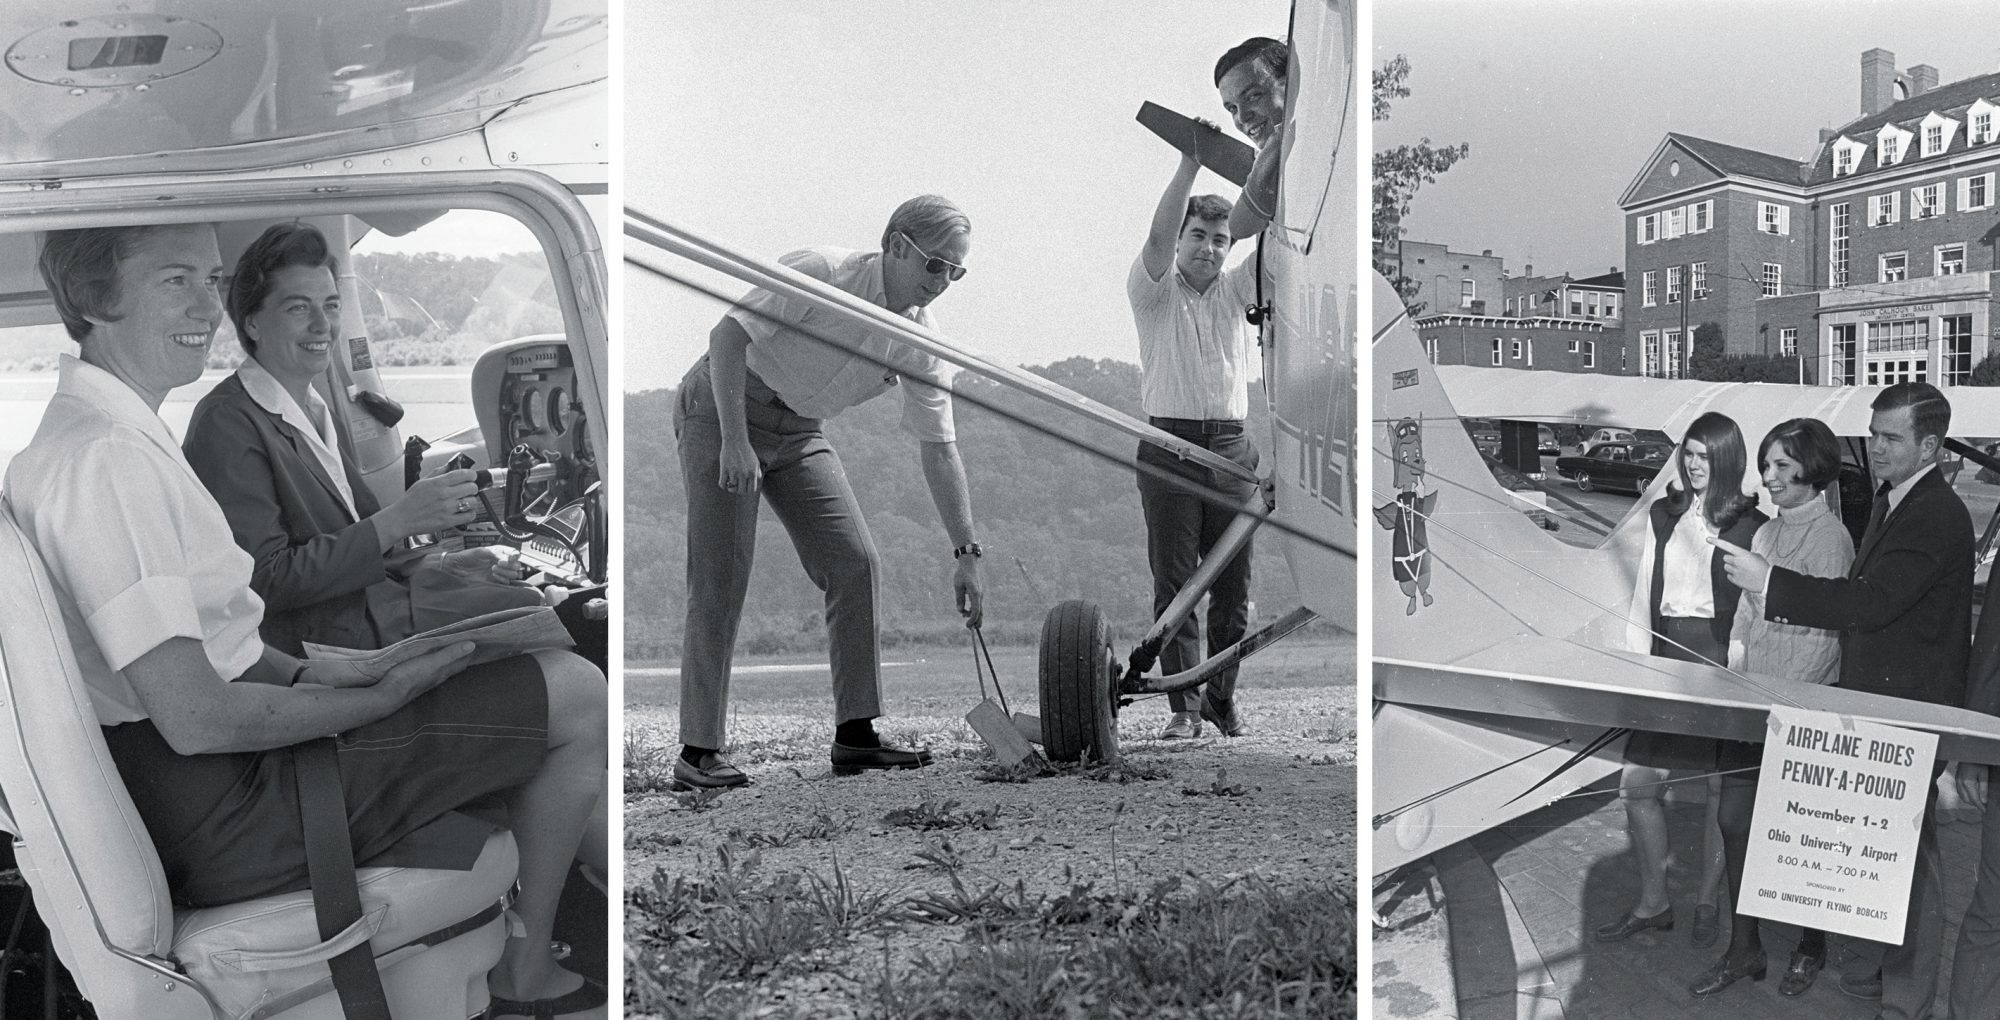 collage of three vintage photos of people in Athens in or looking at airplanes